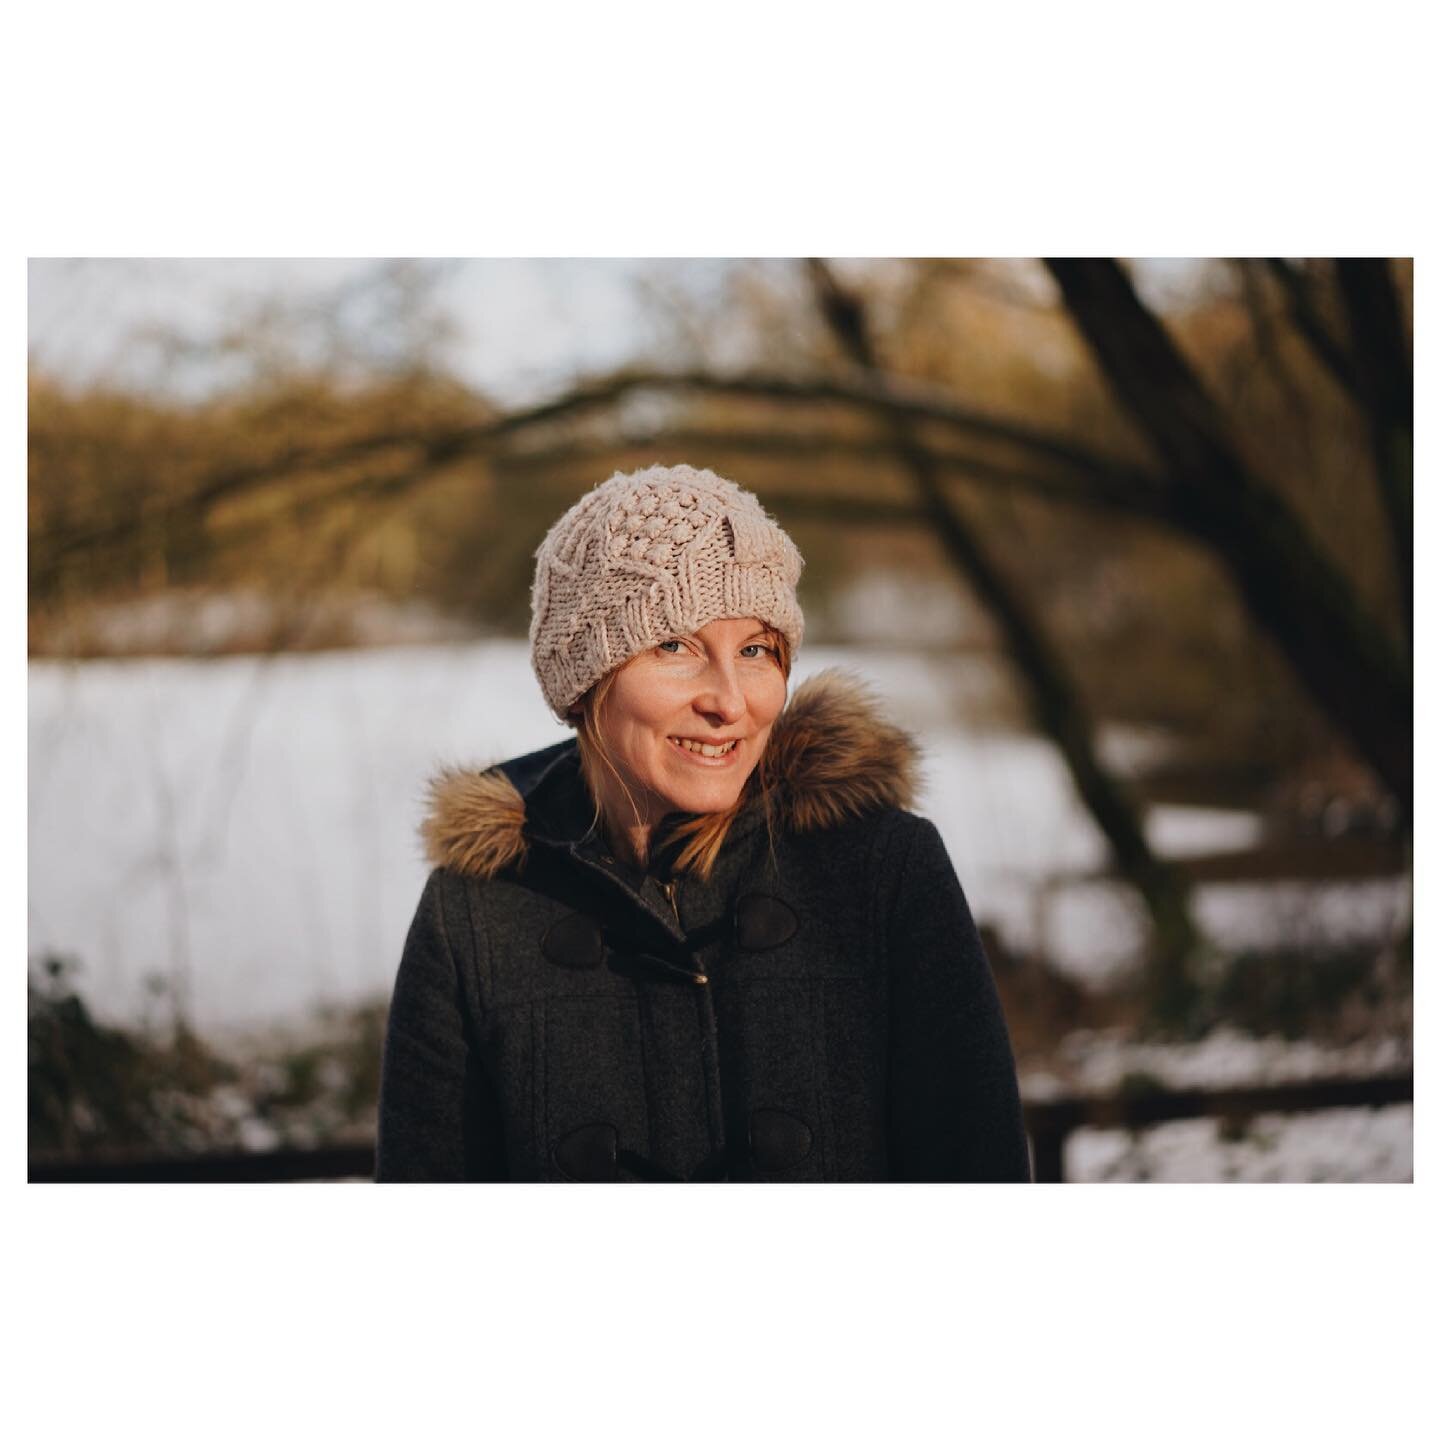 ~ Portrait ~ Day 11 #marchmeetthemaker Today&rsquo;s prompt is about showing me, so here I am 🙂. My name is Clare (without an i) and I live in a Nottinghamshire village not far from Sherwood Forest 🌳. I&rsquo;m very lucky that my husband is a photo